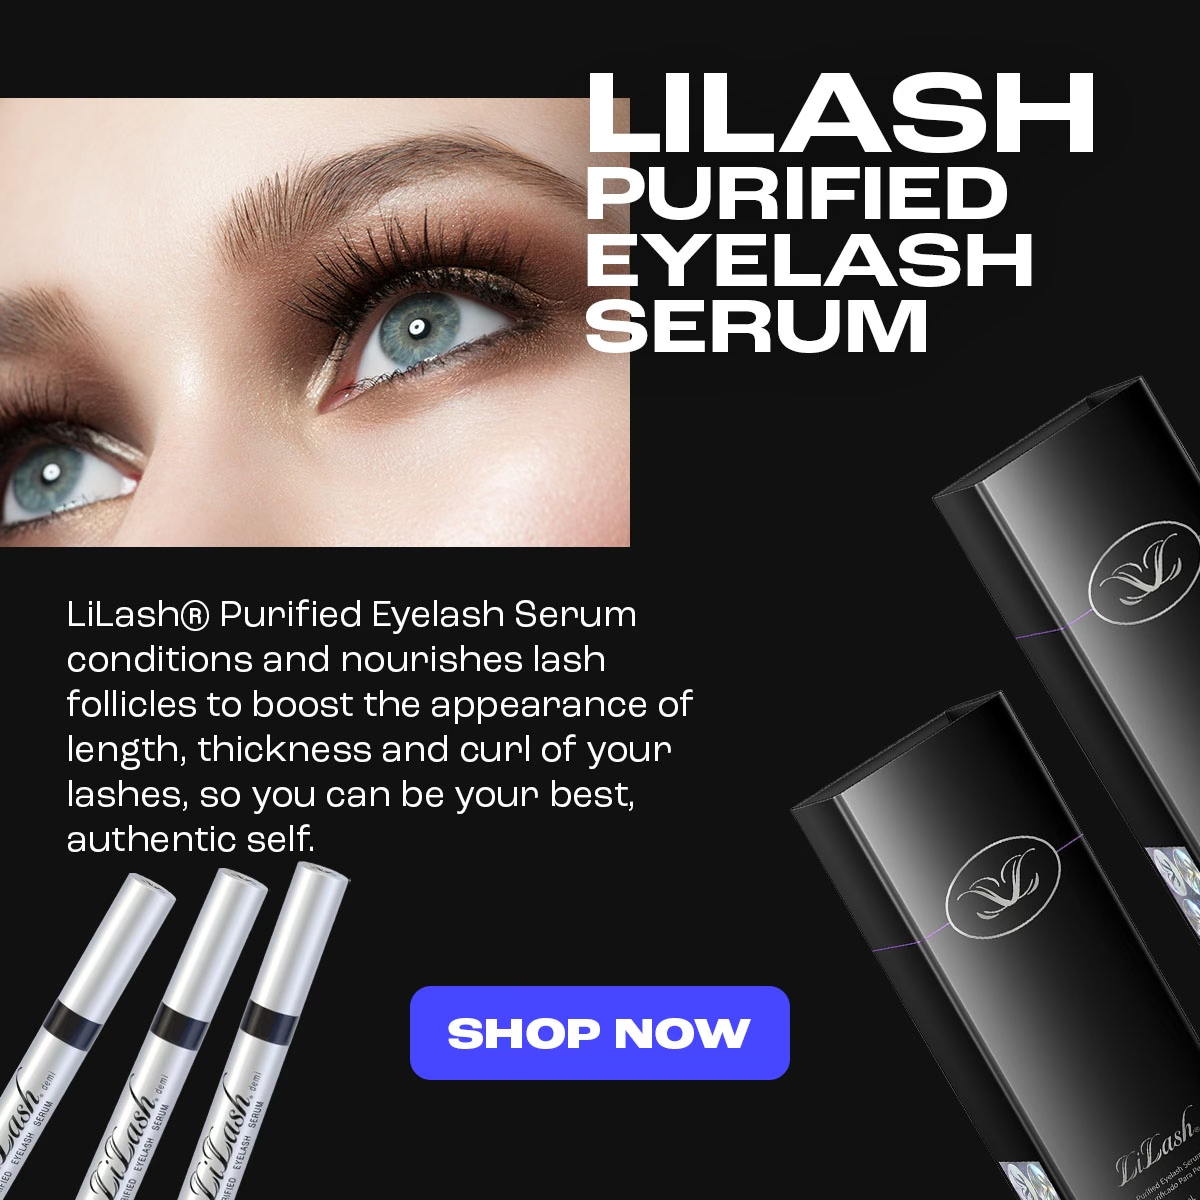 LiLash Purified Eyelash Serum conditions and nourishes lash follicles to boost the appearance of length, thickness, and curl of your lashes, so you can be your best authentic self.